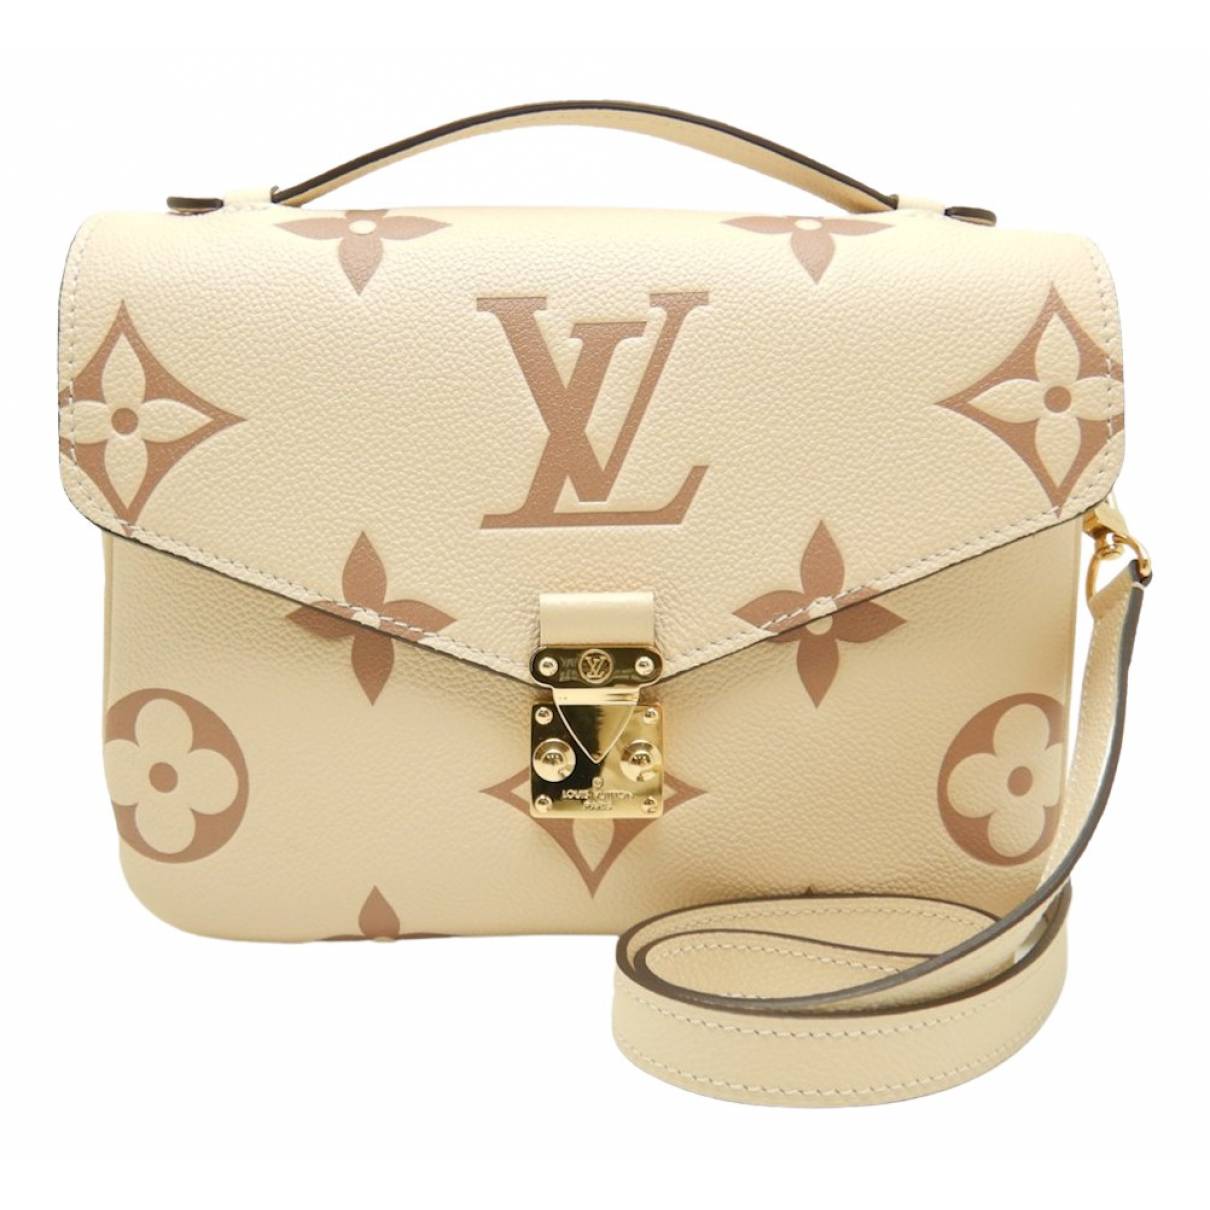 Louis Vuitton - Authenticated Metis Handbag - Leather White for Women, Very Good Condition